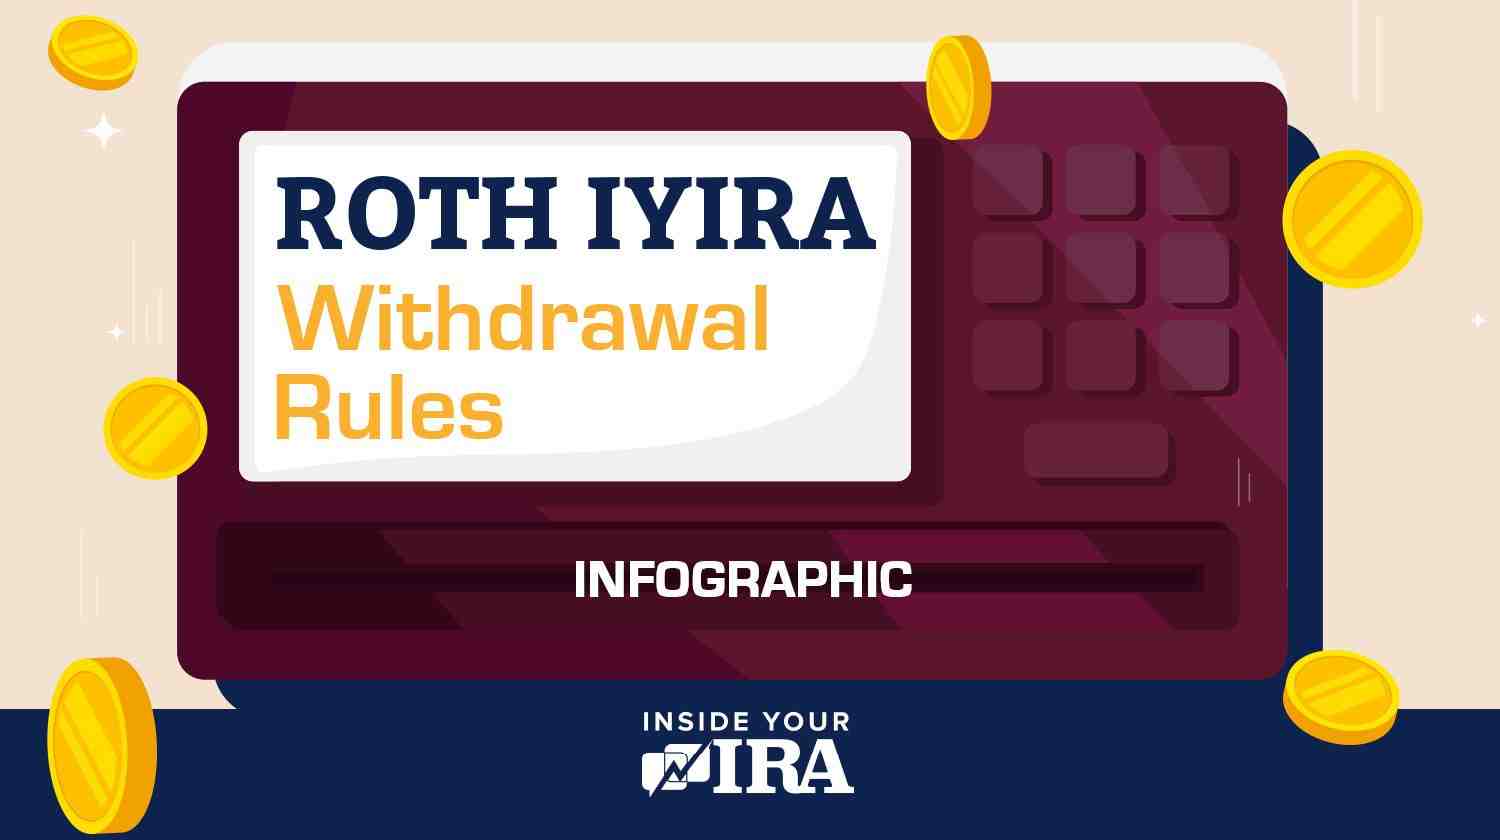 Can I withdraw from my IRA in 2021 without penalty?